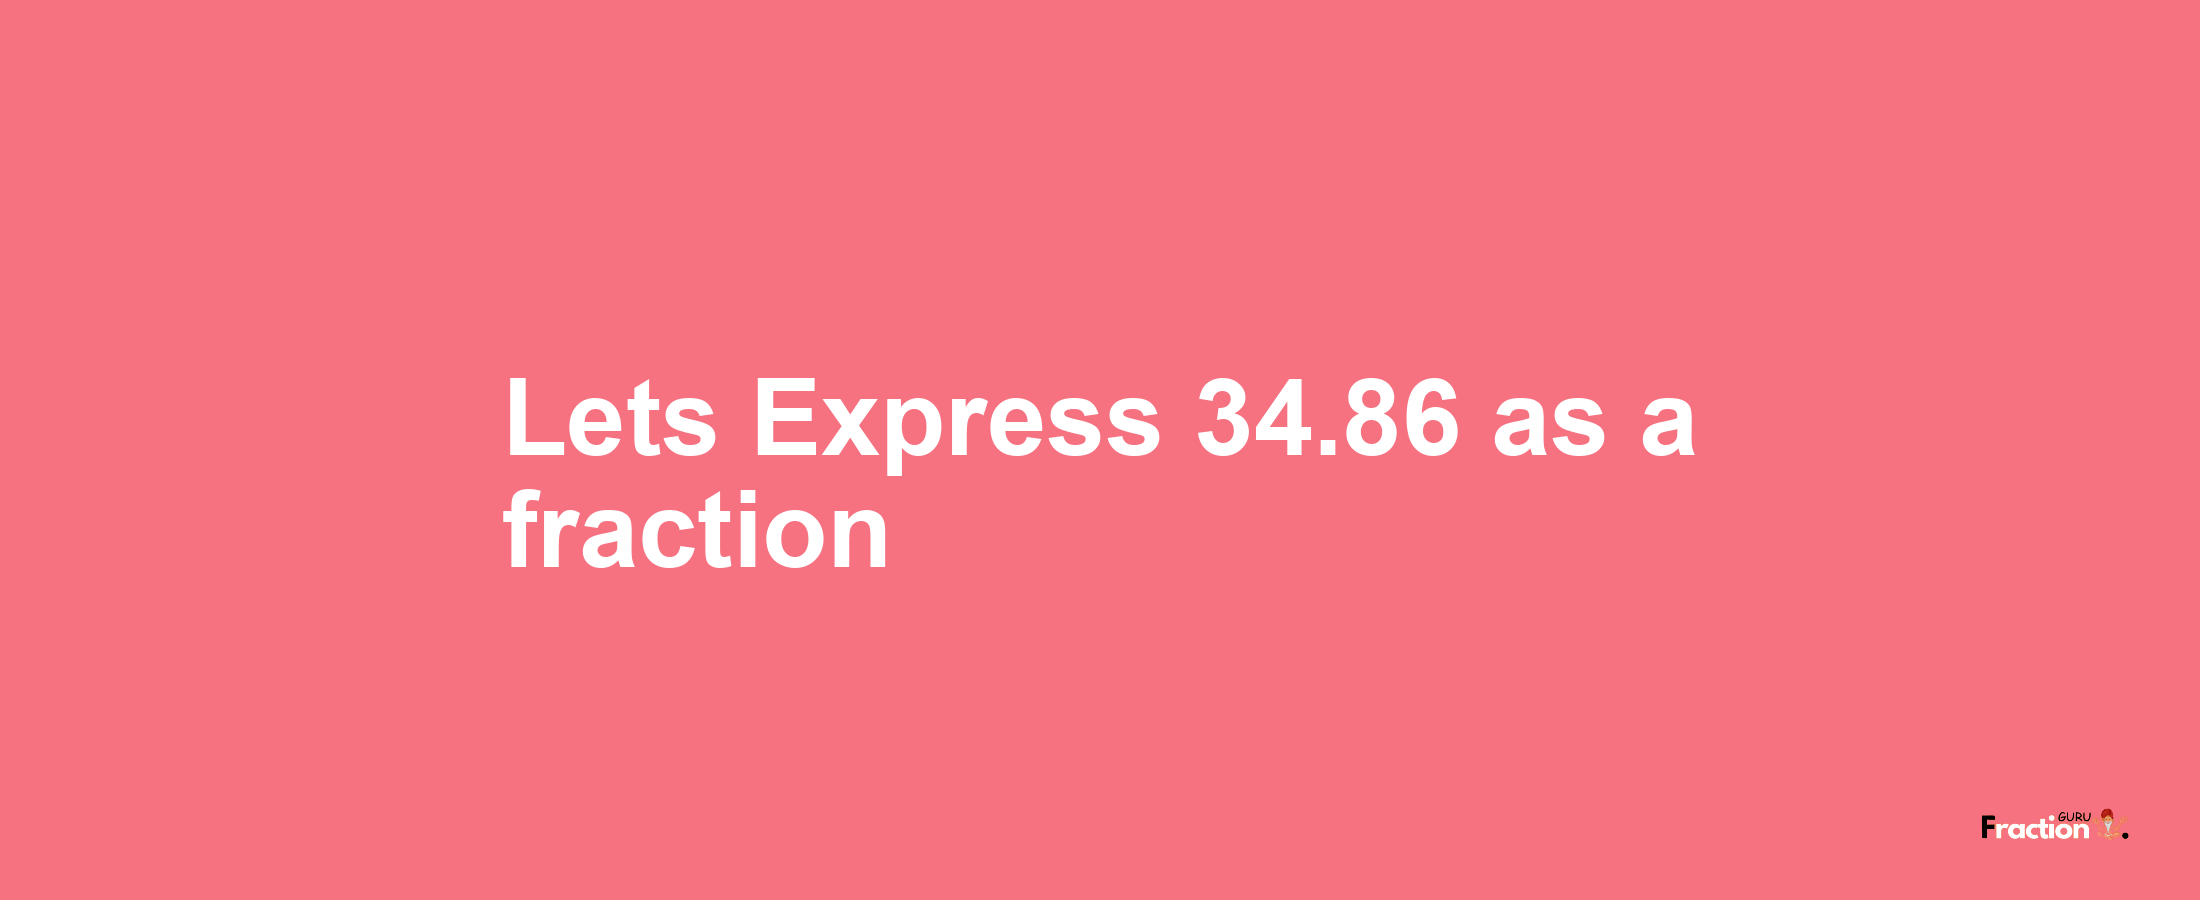 Lets Express 34.86 as afraction